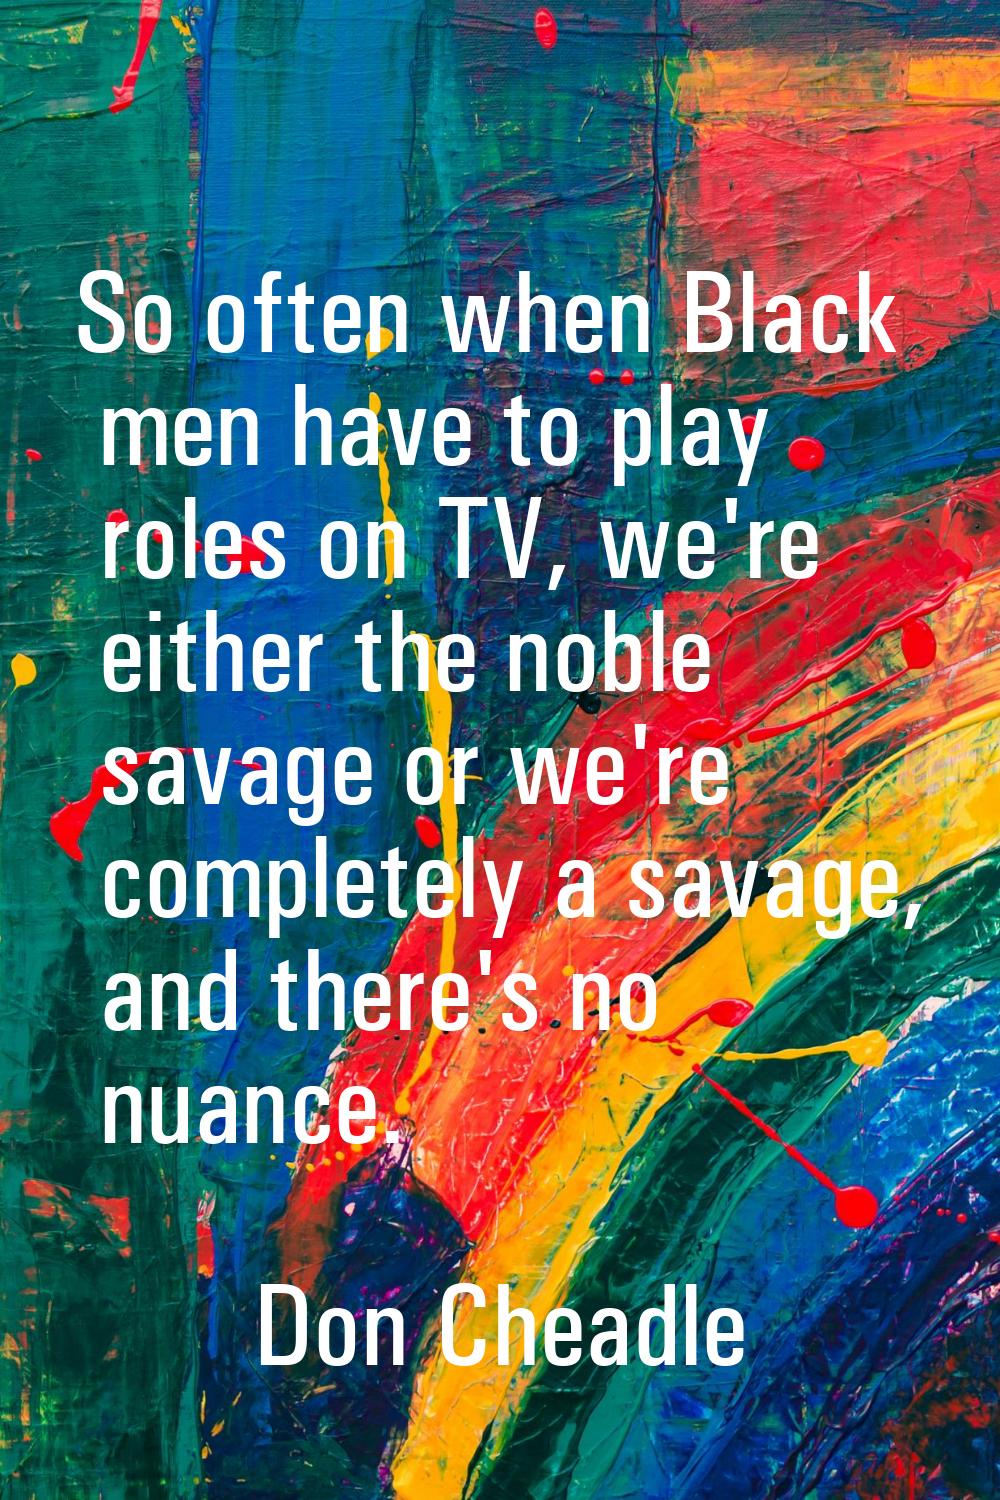 So often when Black men have to play roles on TV, we're either the noble savage or we're completely